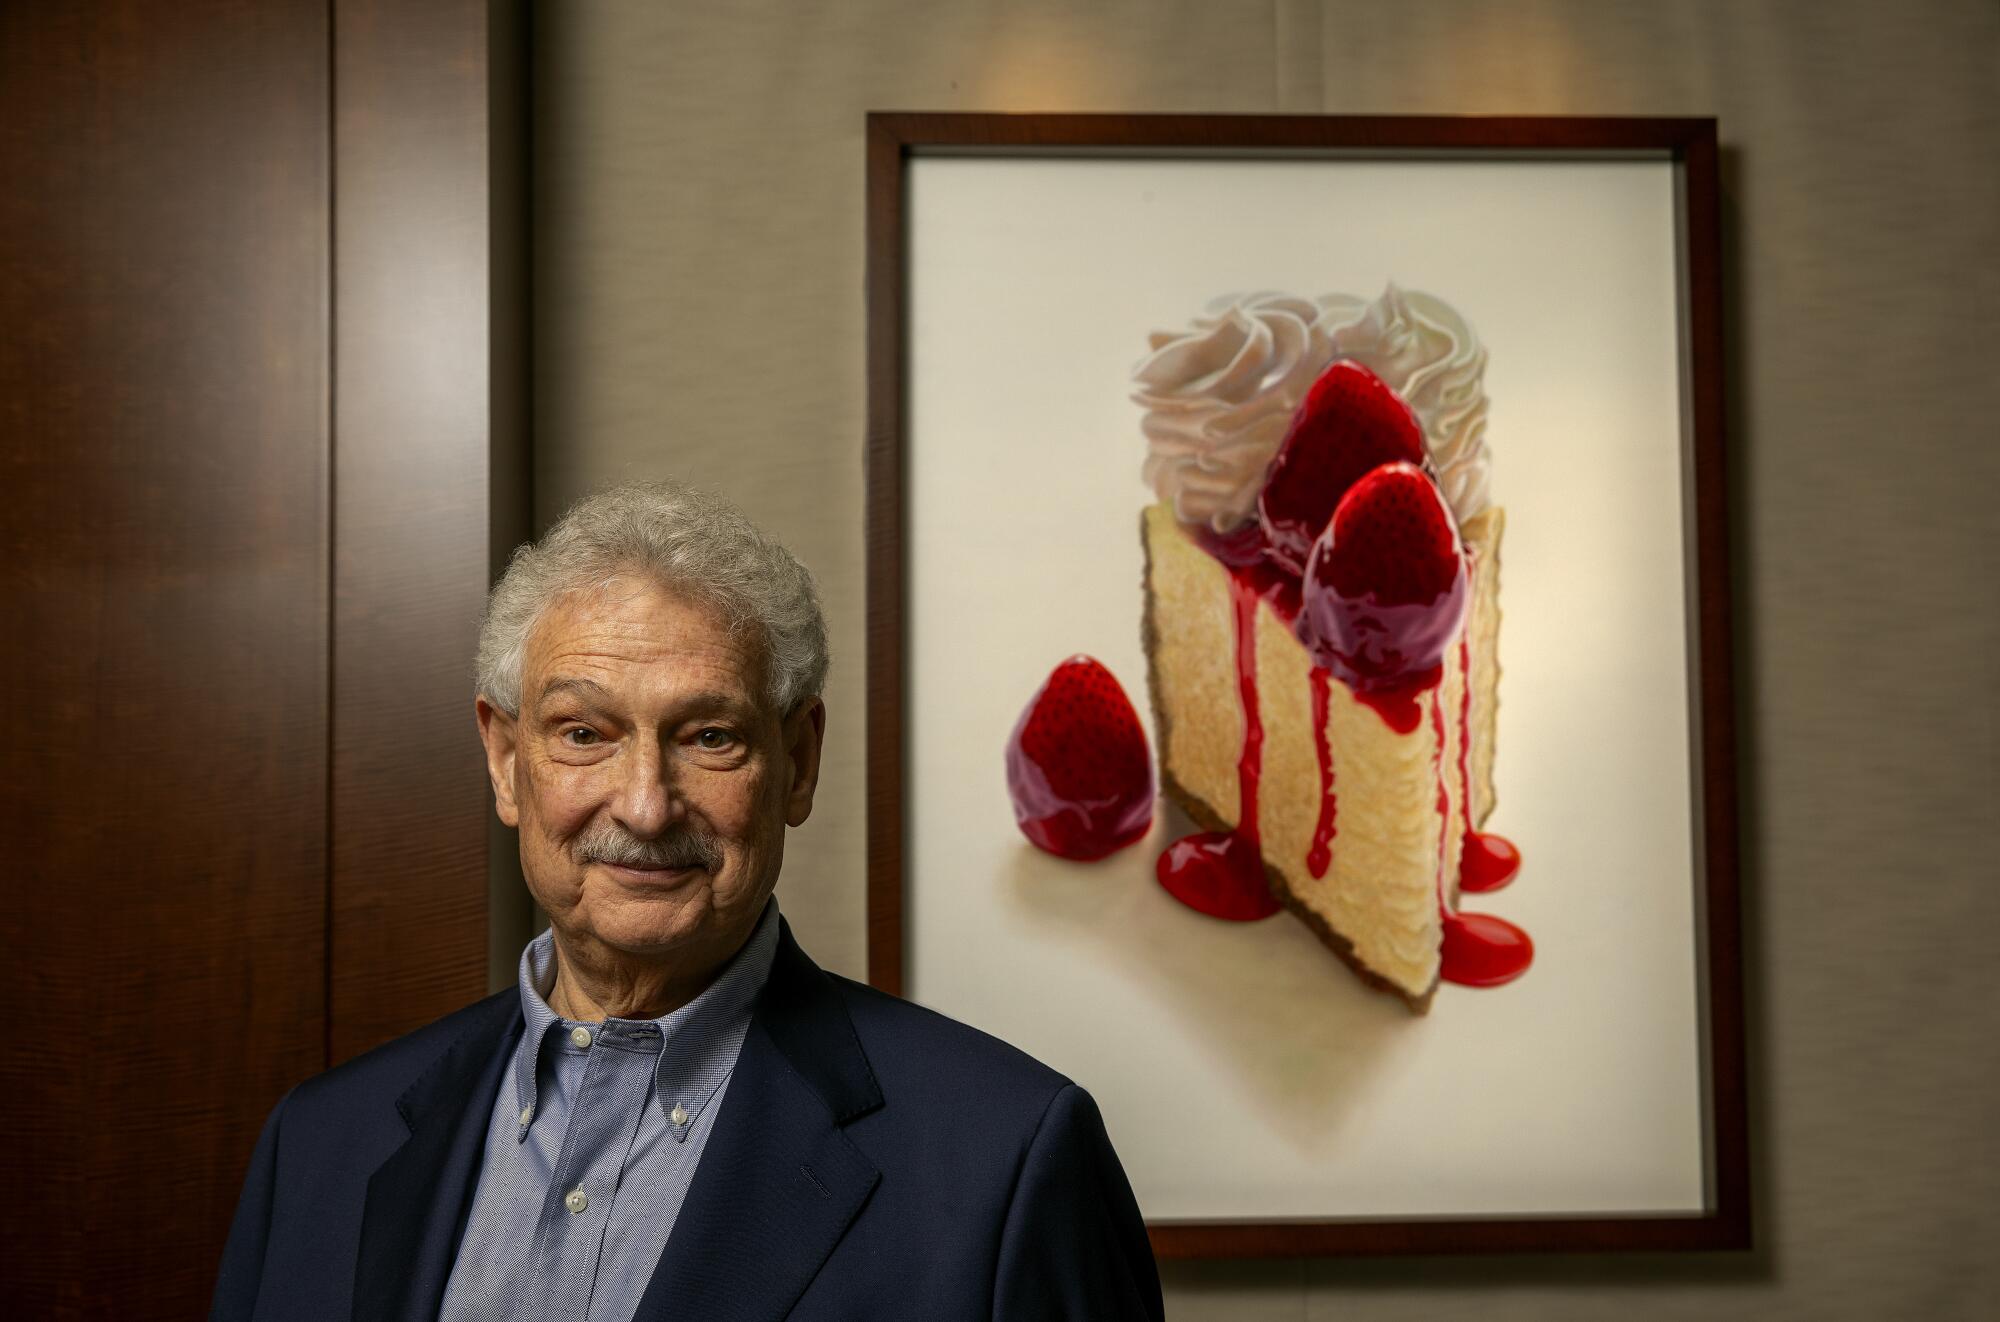 David Overton in front of a large painting of a cheesecake.